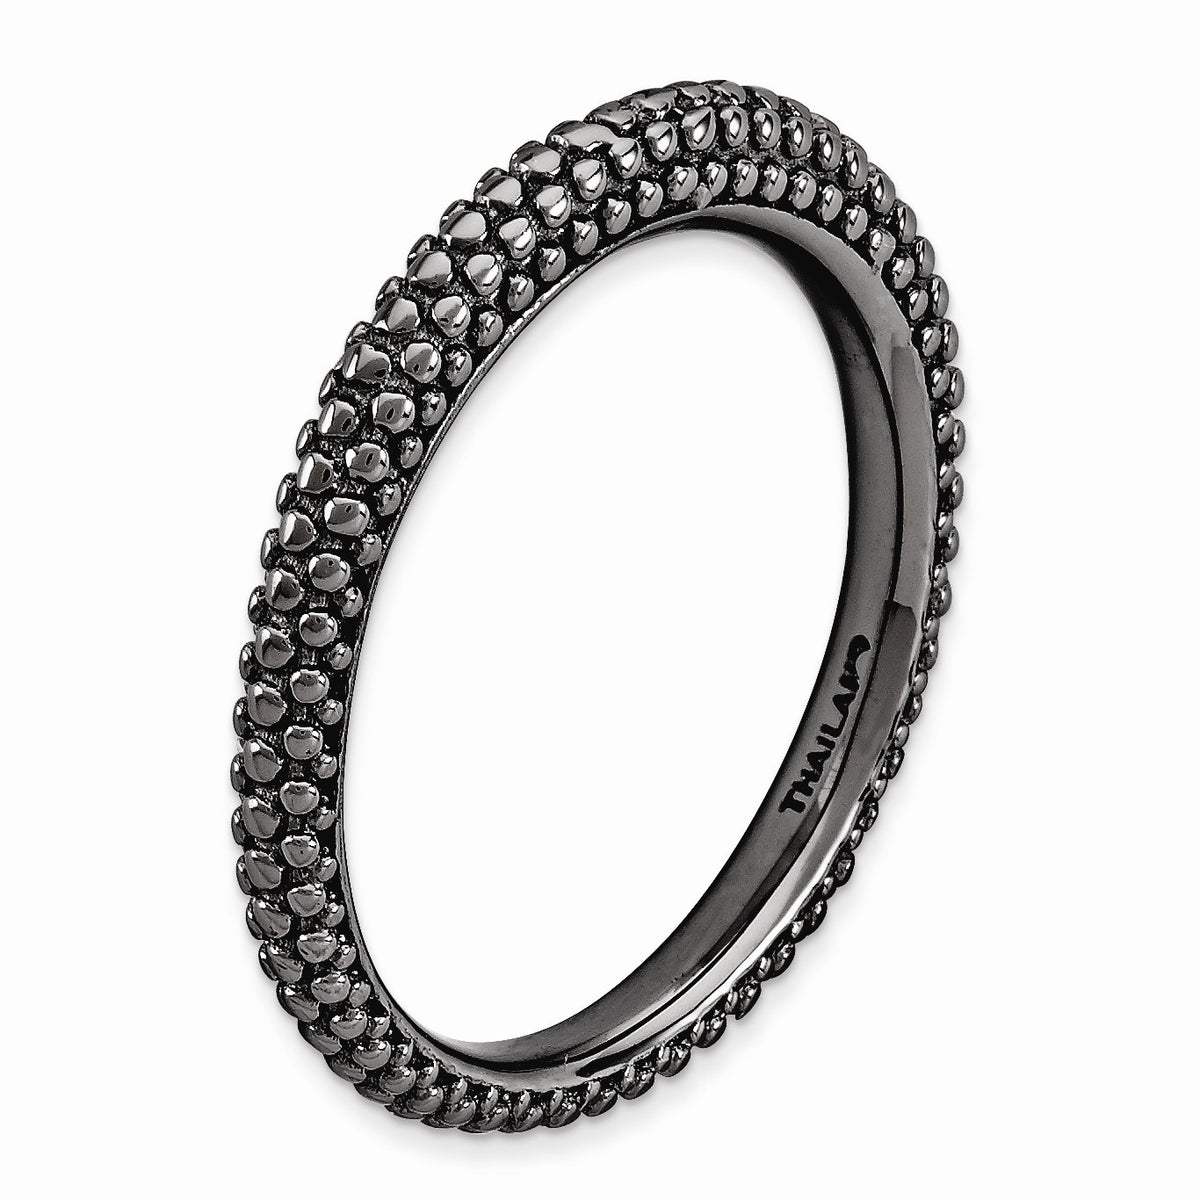 Alternate view of the Stackable Black Ruthenium Plated Silver Domed Milgrain Band by The Black Bow Jewelry Co.